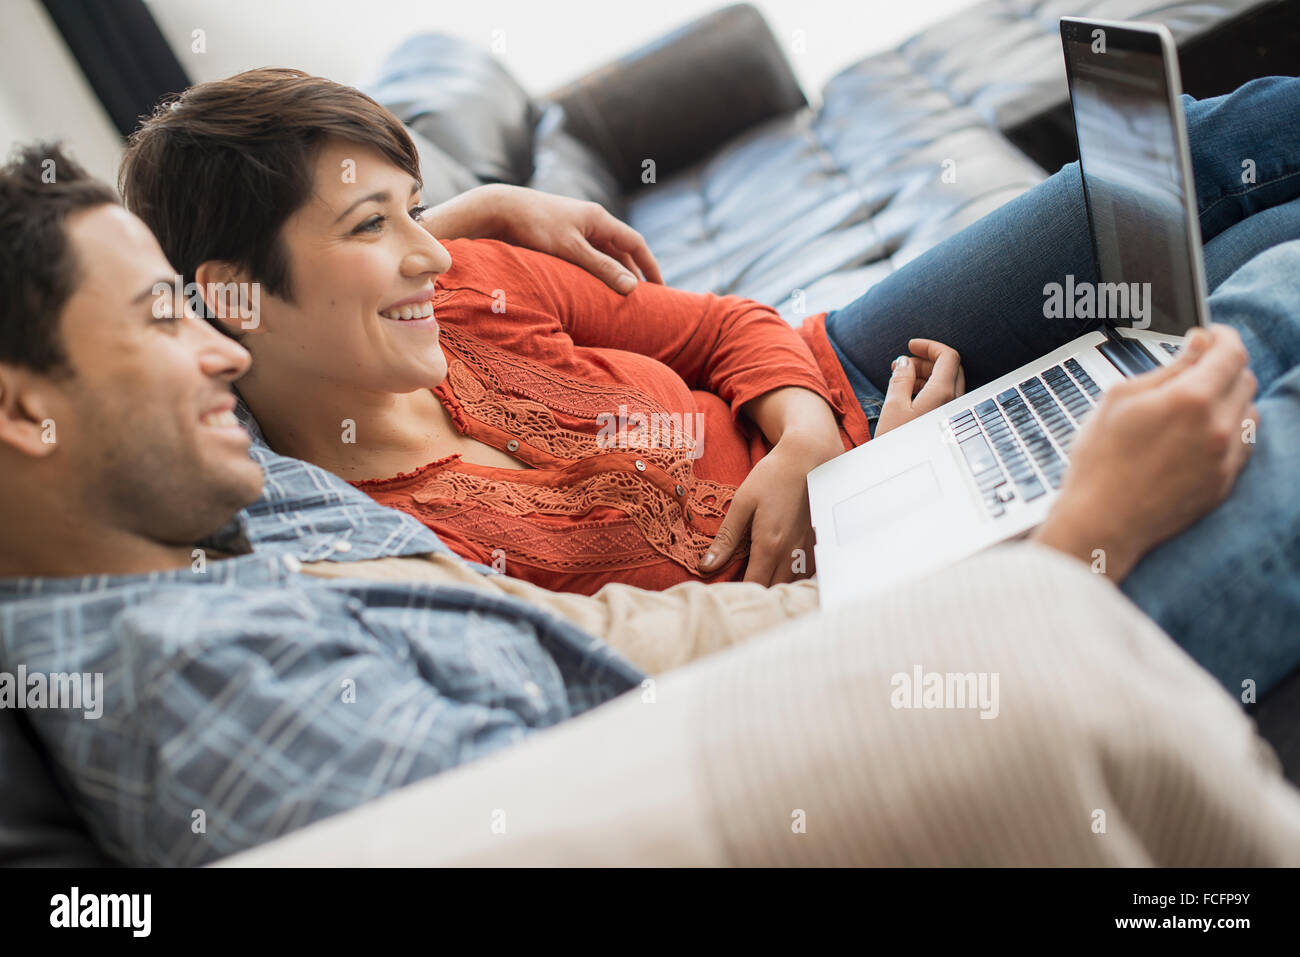 A man and woman sitting on a sofa, looking at the screen of a laptop. Stock Photo